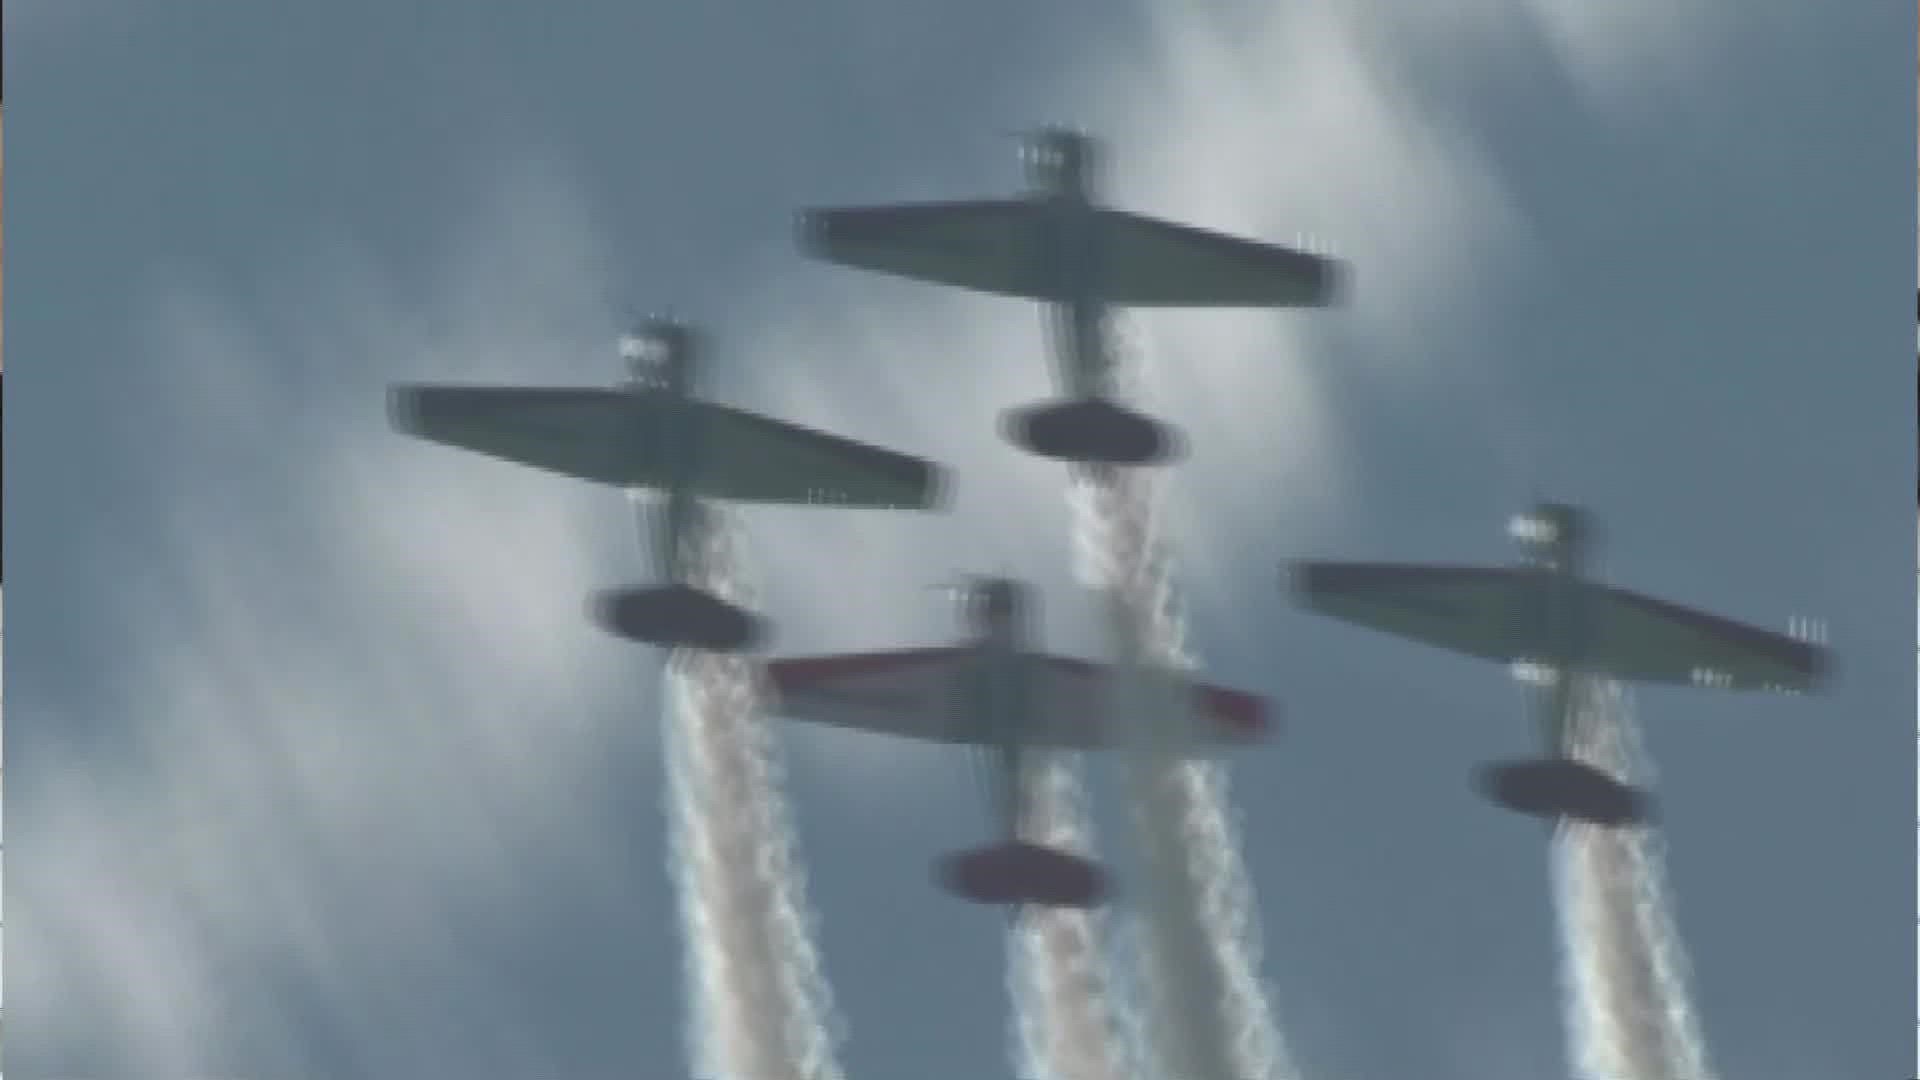 With the Smoky Mountain Air Show just on the horizon, we hear from a member of one of the acts, the Aeroshell Aerobatics.